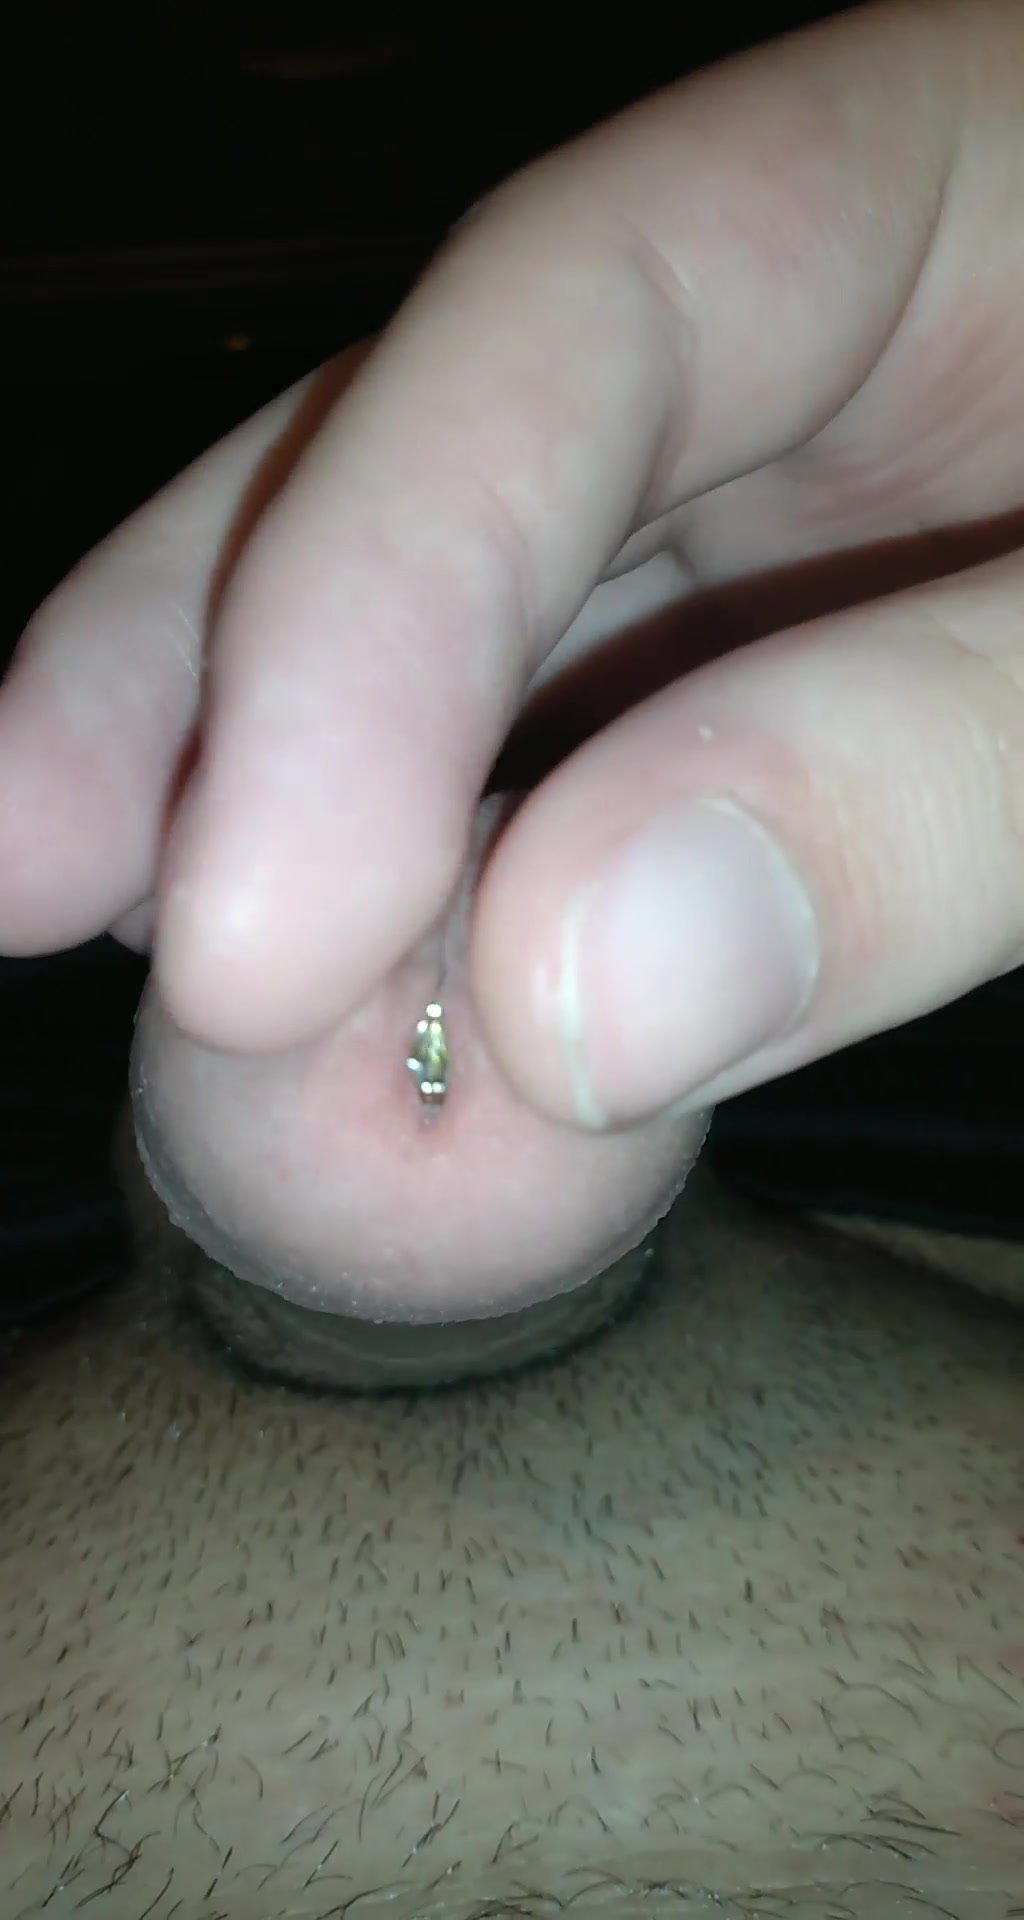 Nail in young boys dick part3